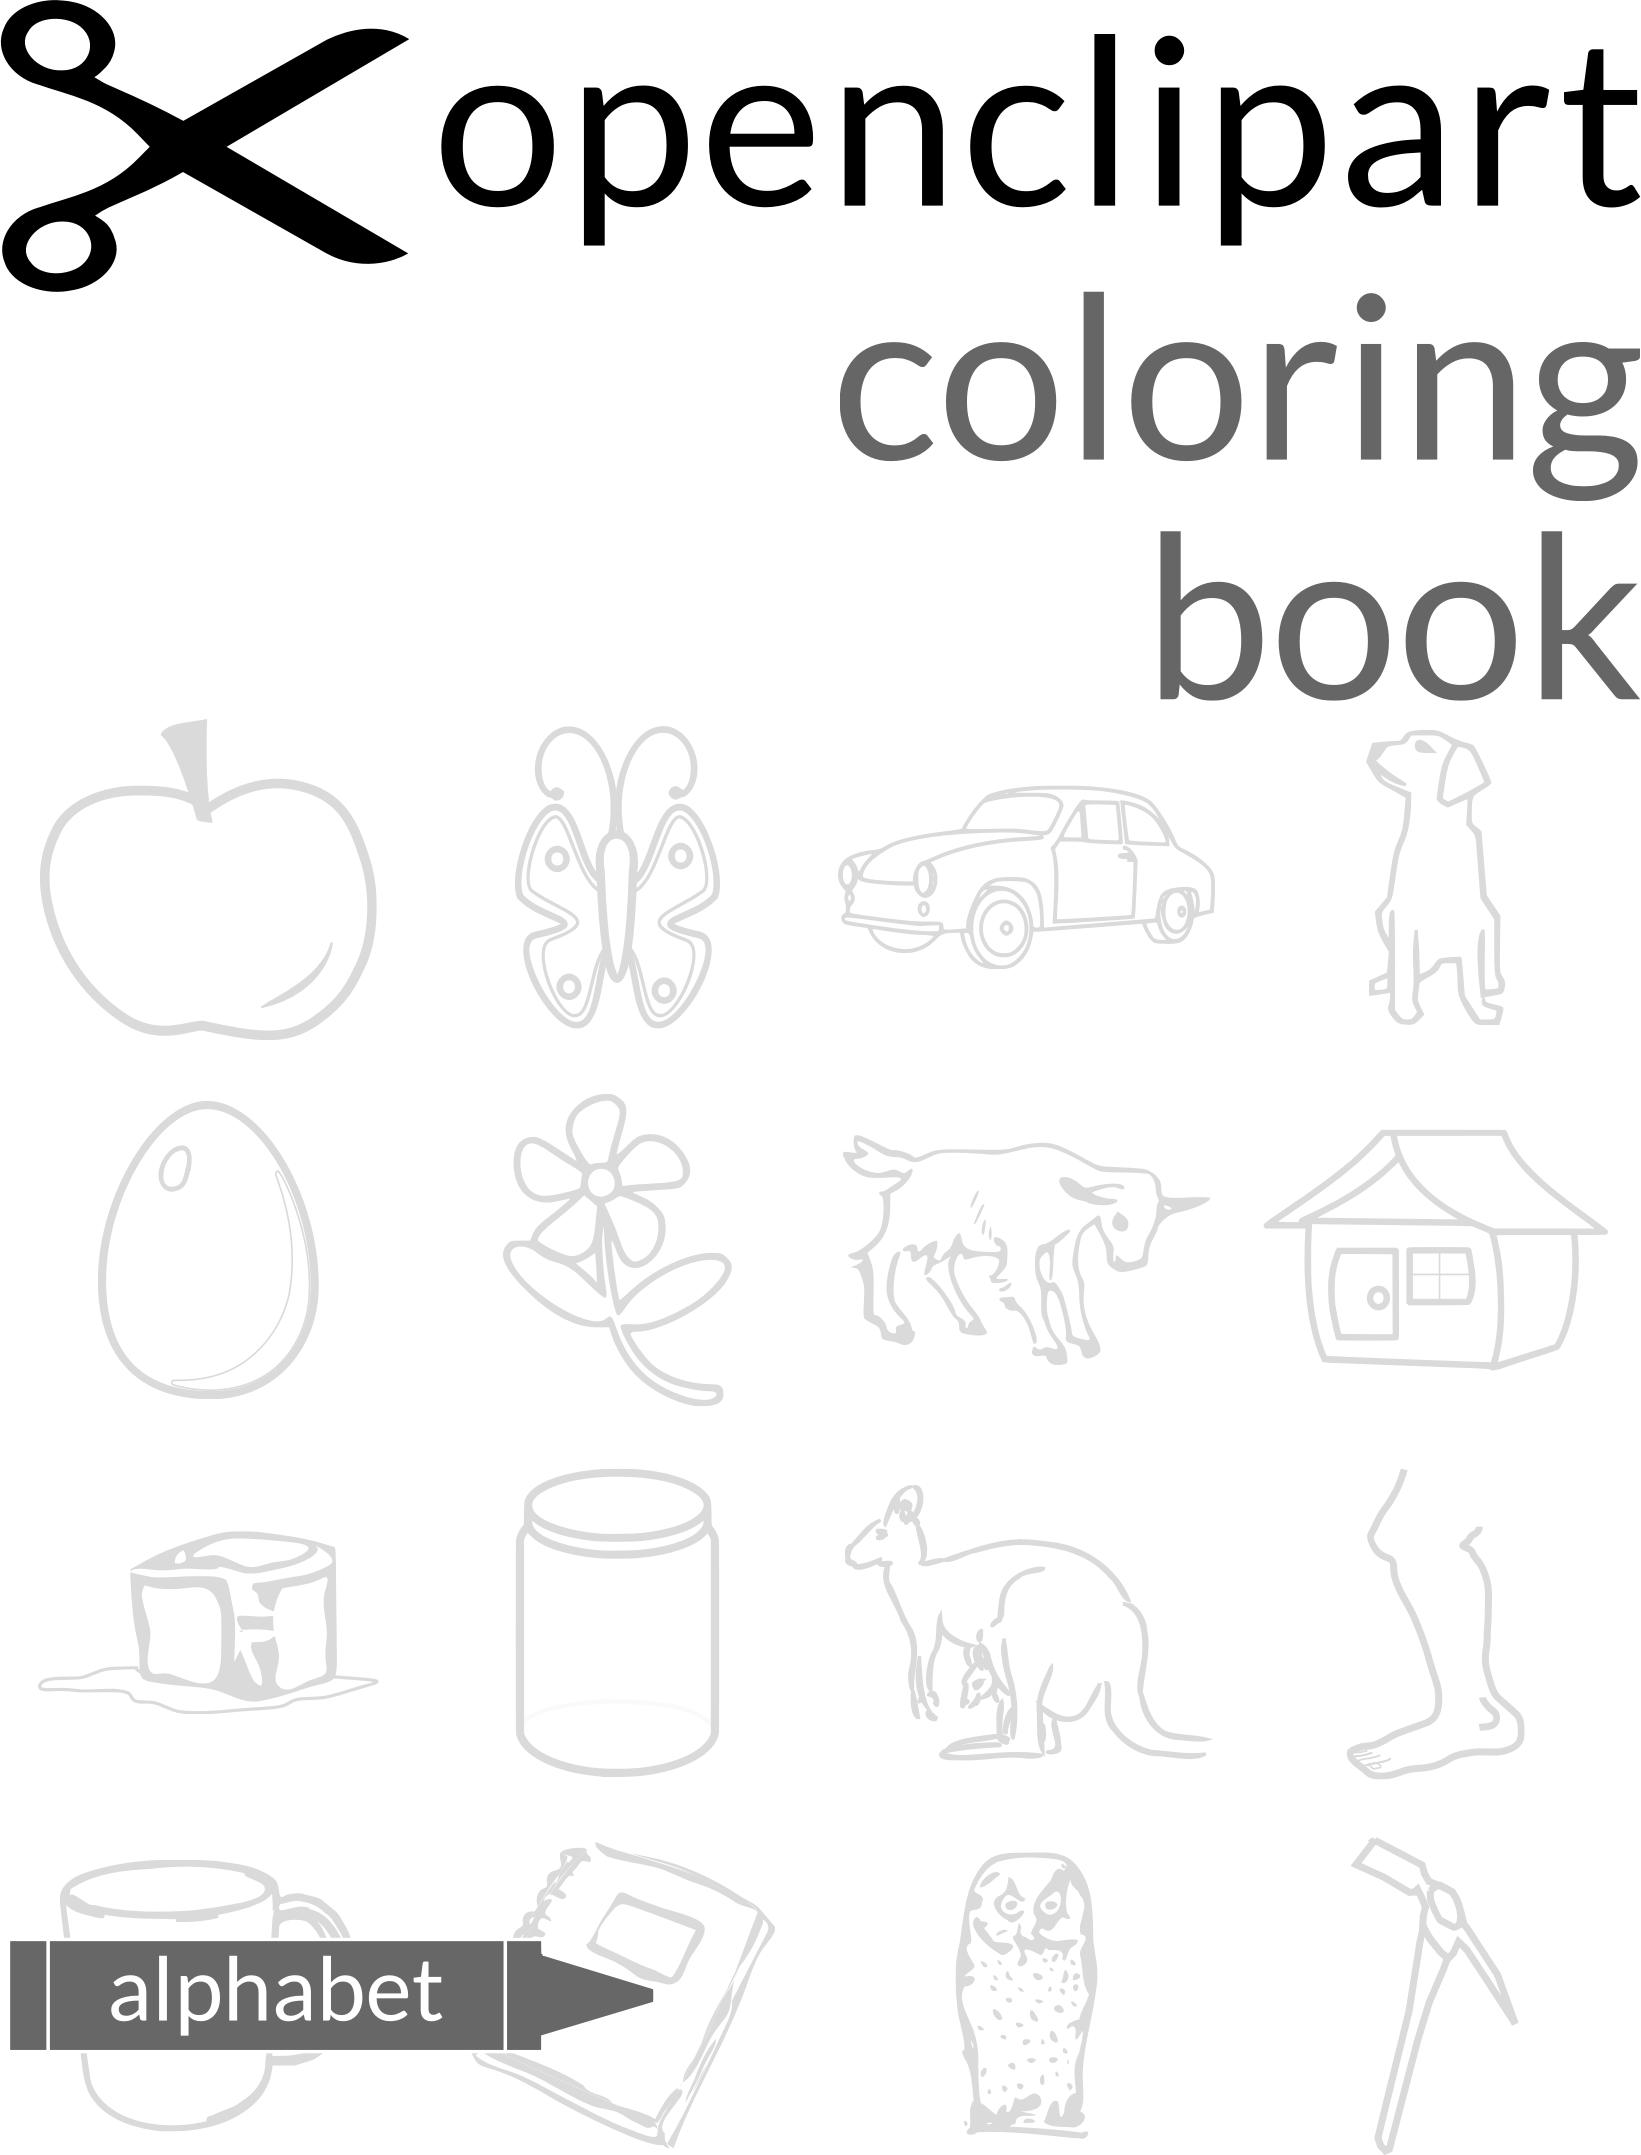 NEW: Openclipart Coloring Books Alphabet Released. Download for FREE. png